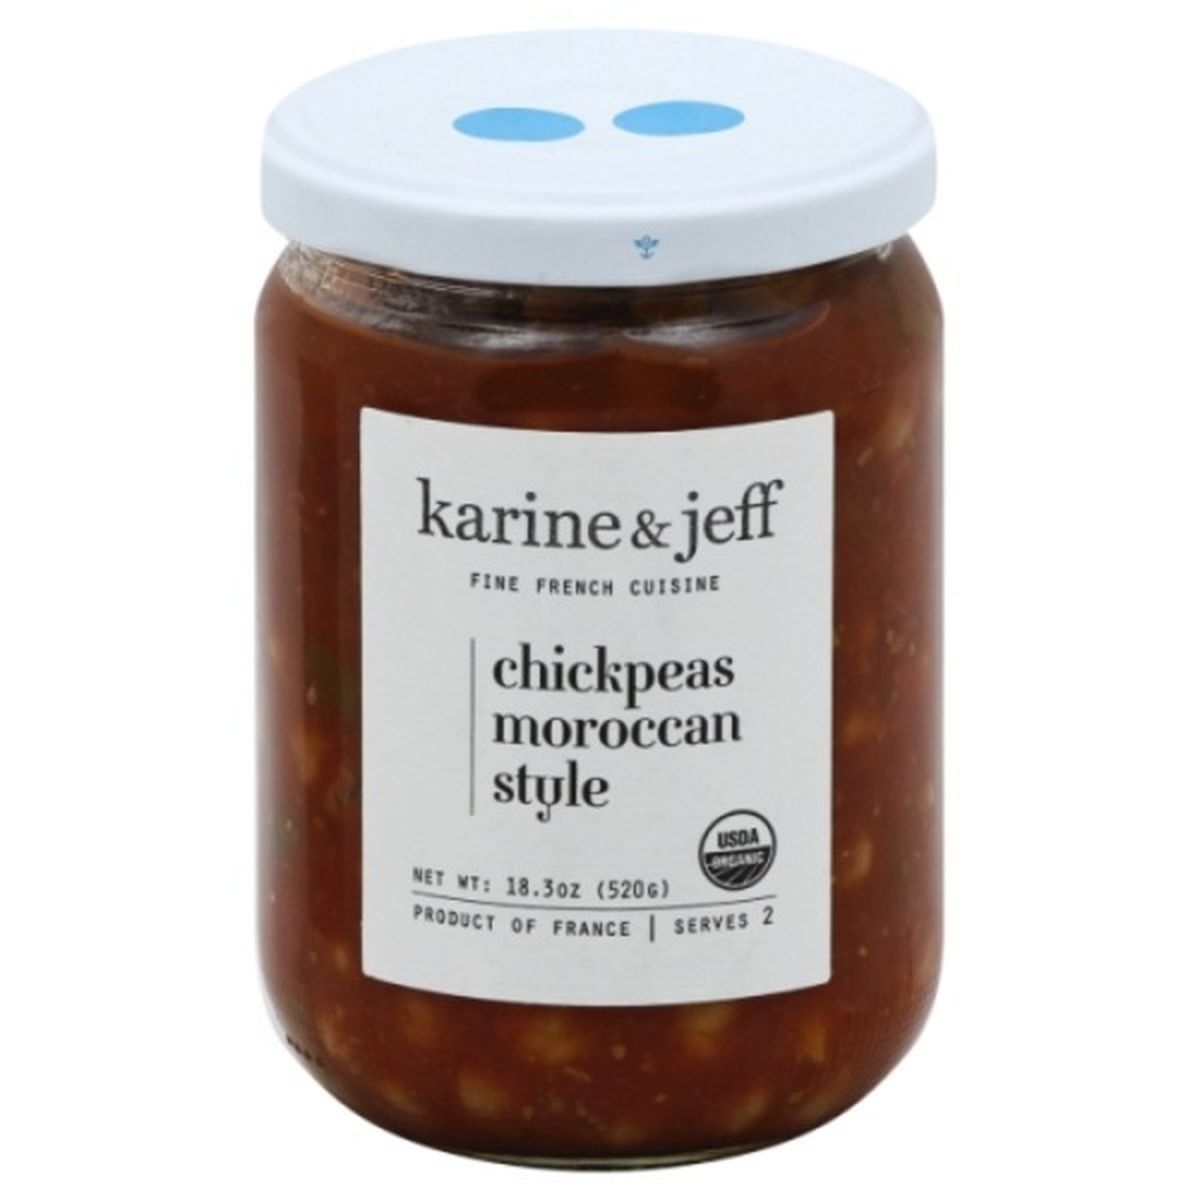 Calories in Karine & Jeff Chickpeas, Moroccan Style